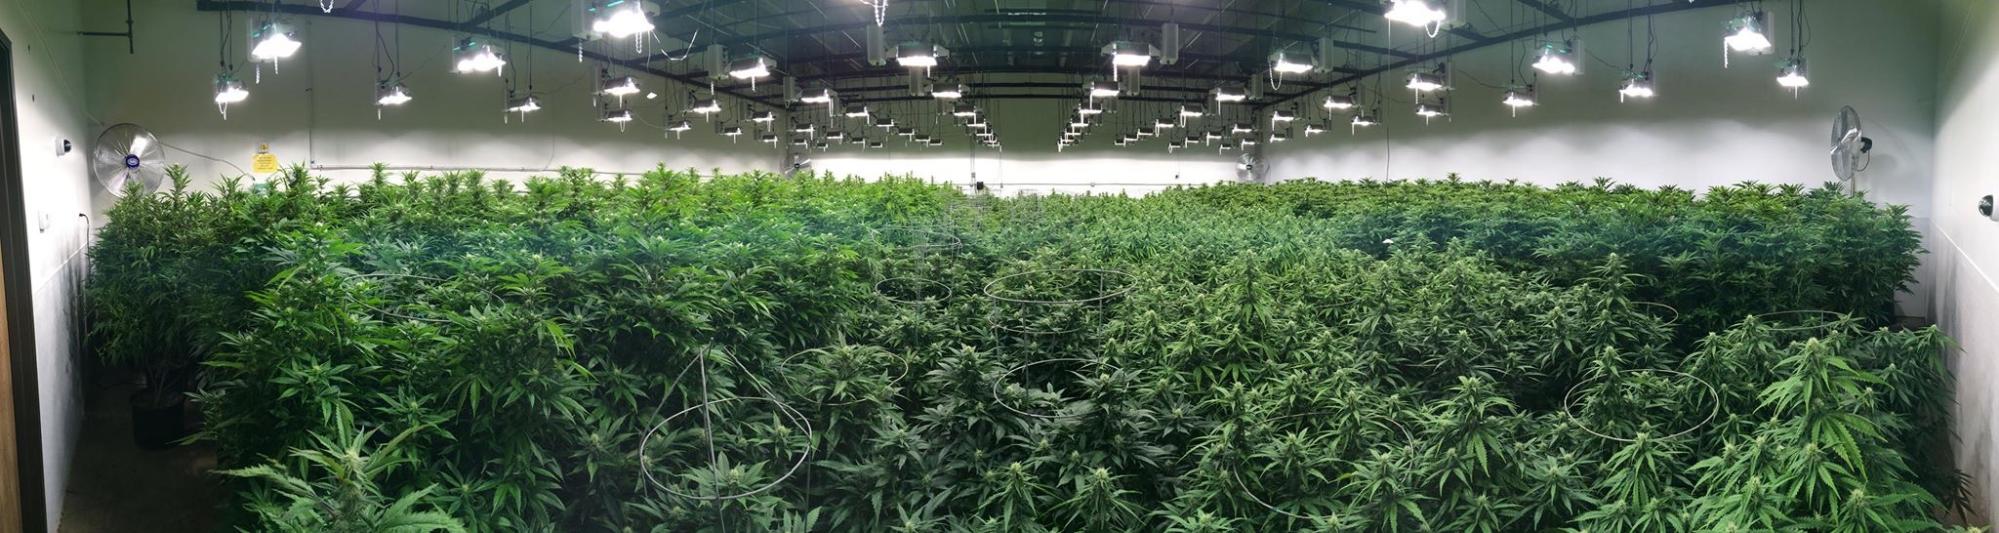 How to Grow Cannabis for the First Time Indoors